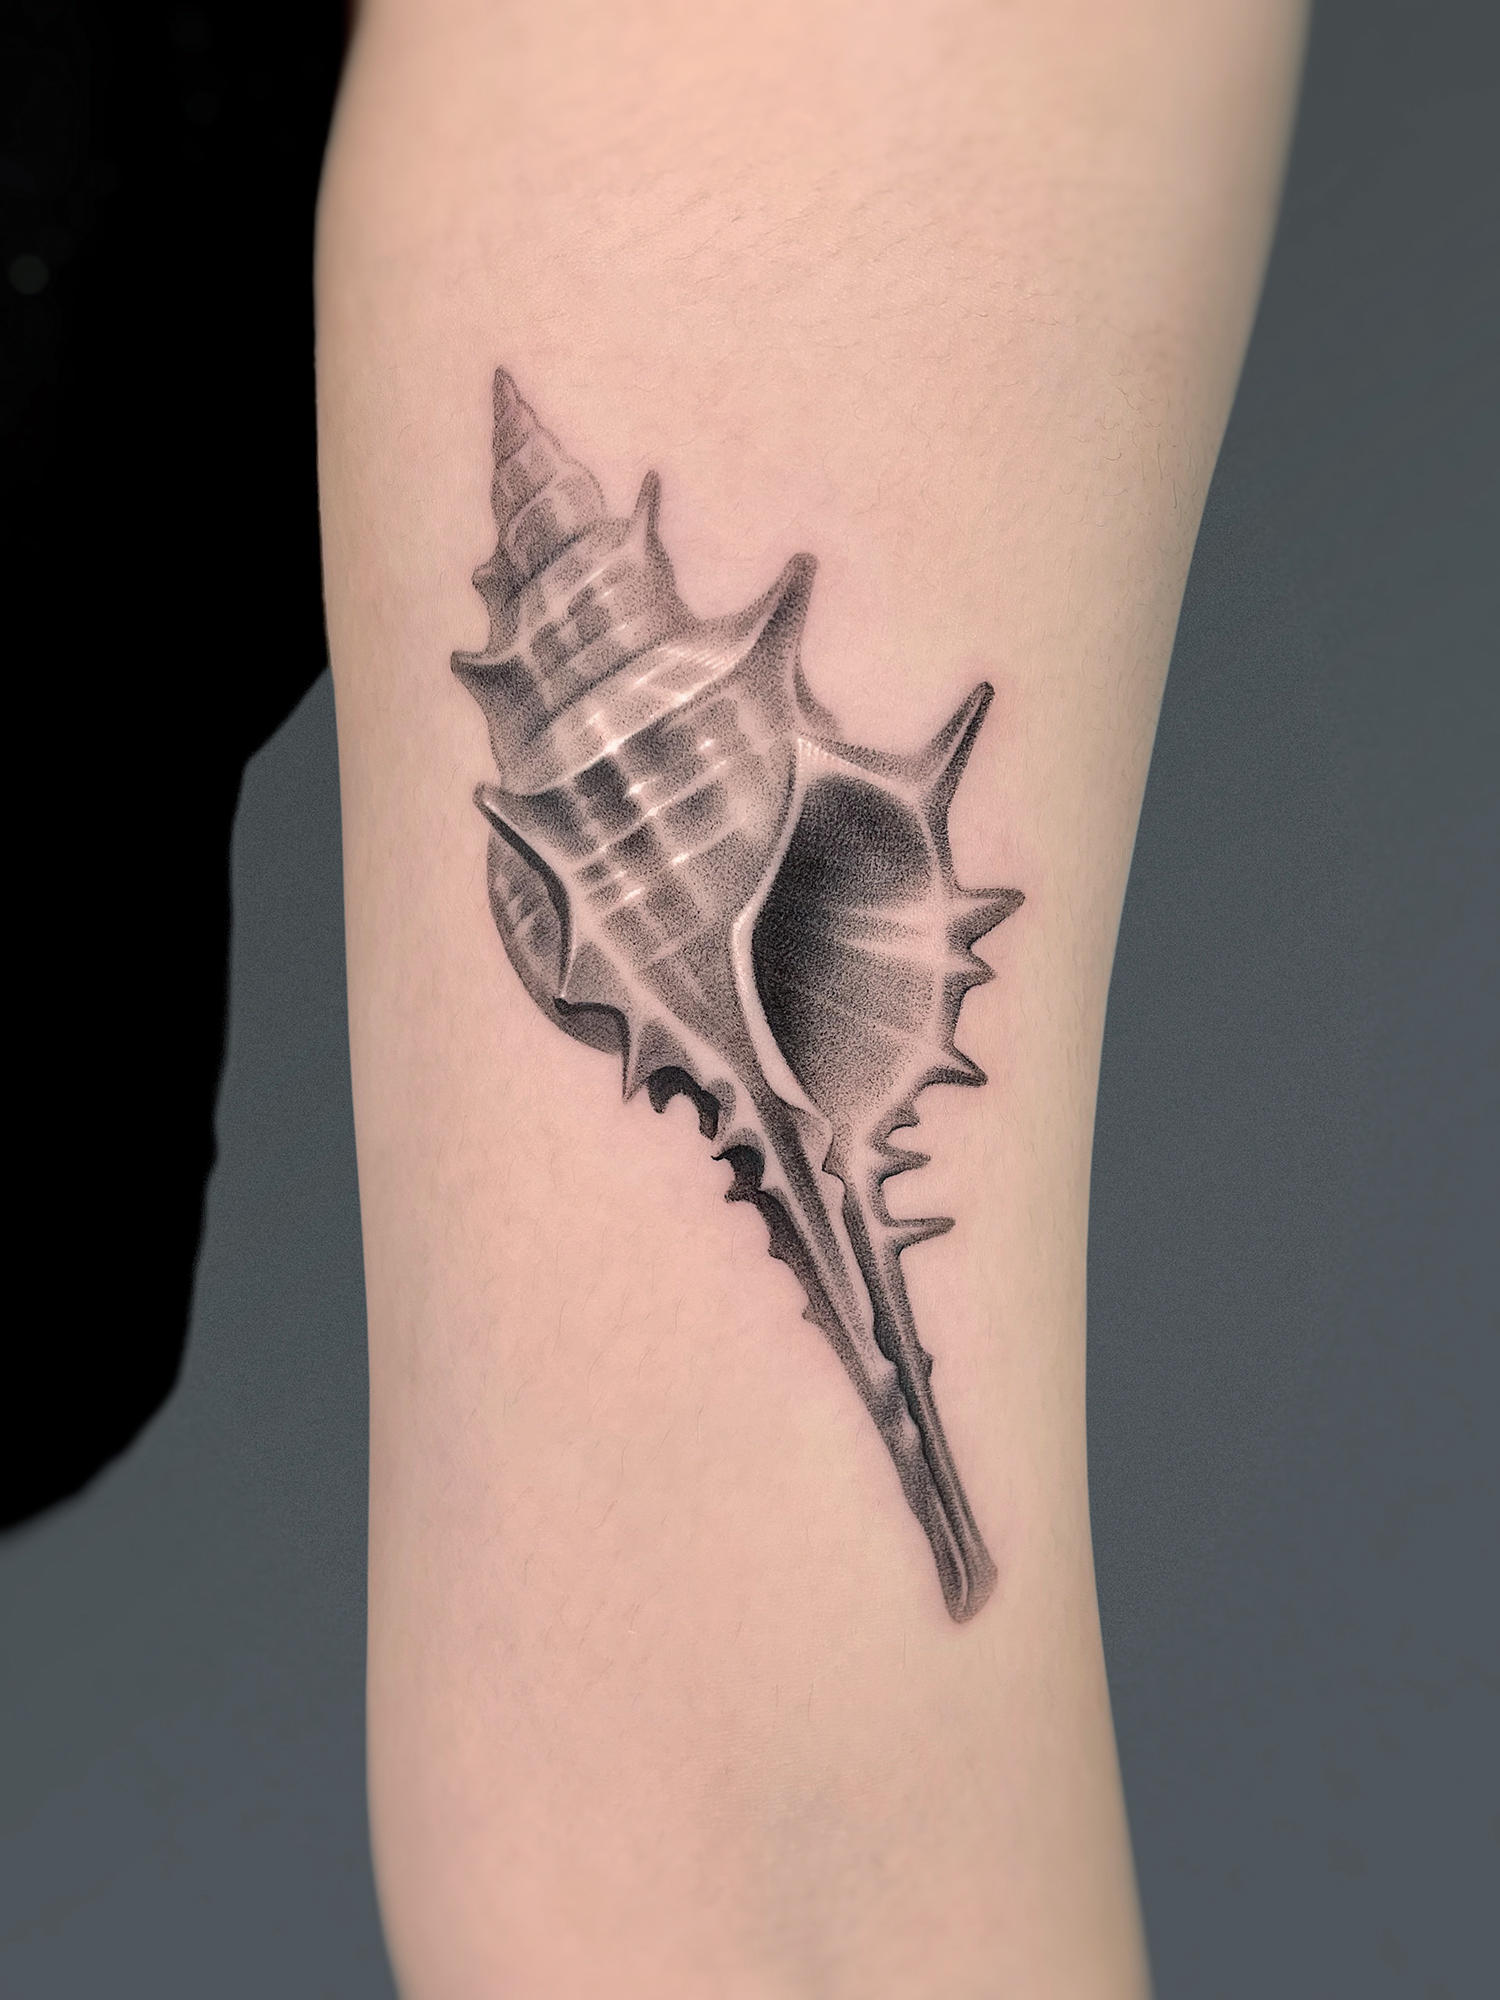 The intricate dotwork on this spiked conch shell is flawless -- tattoo